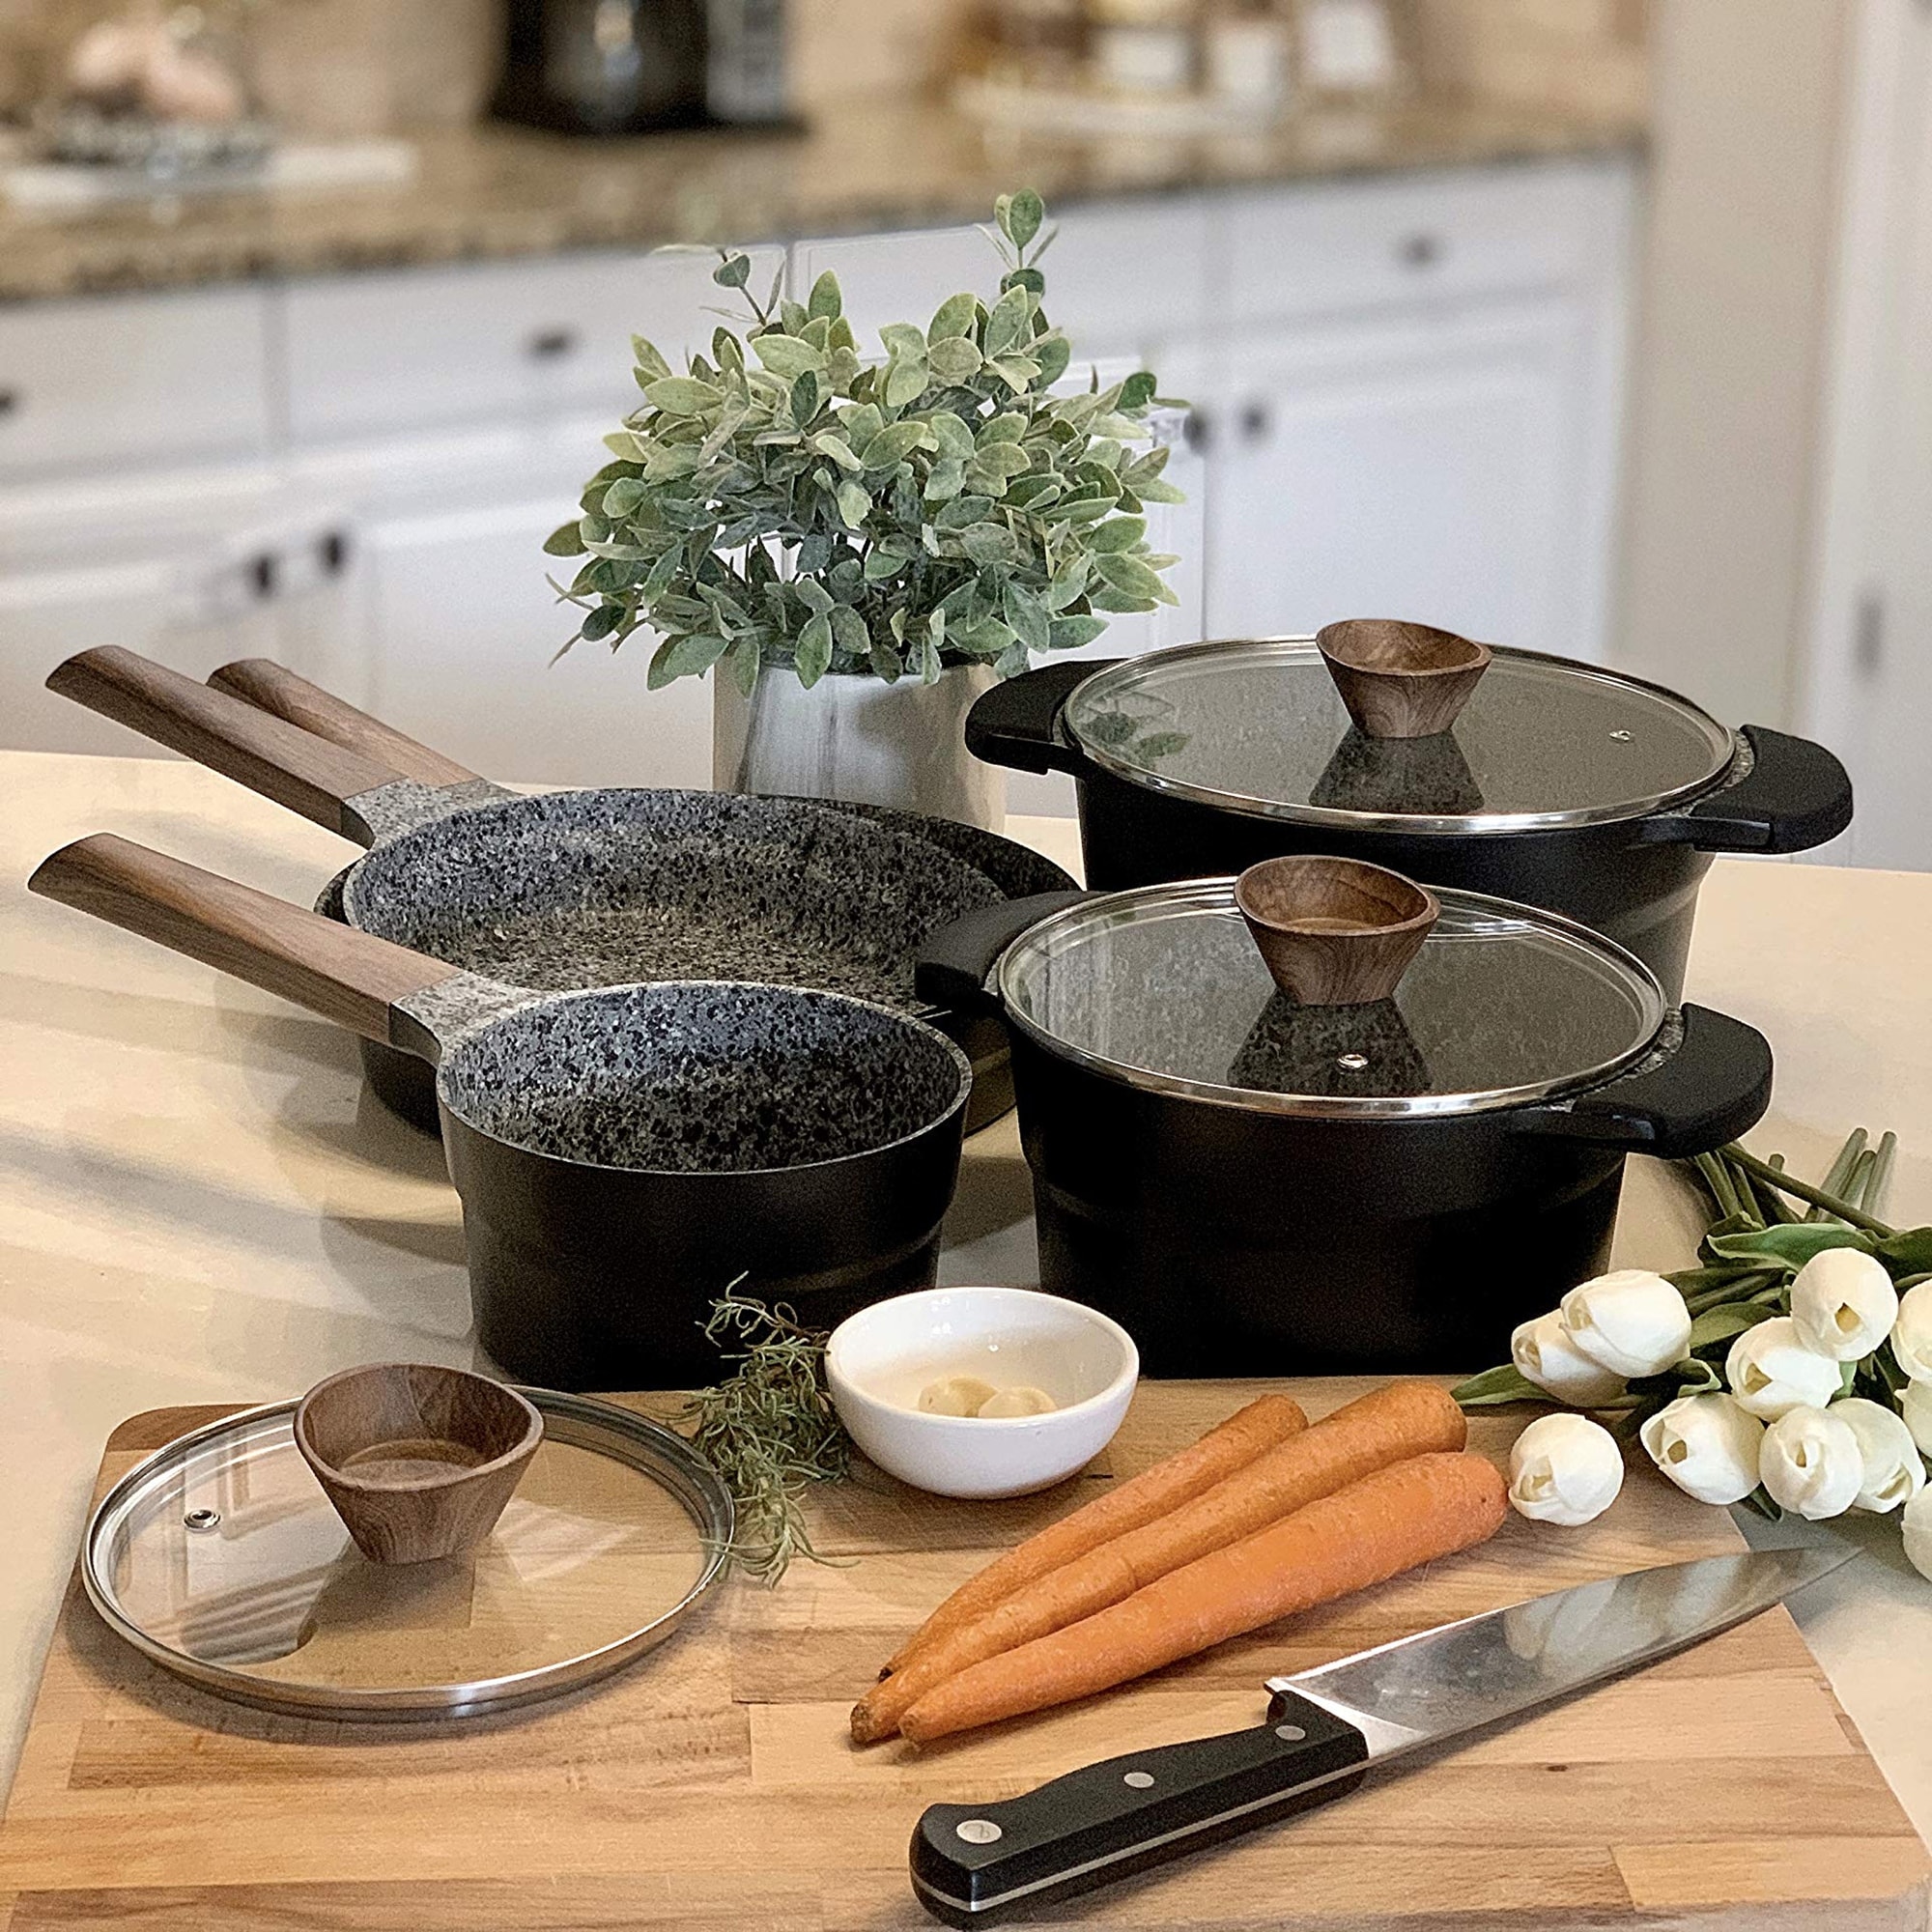 https://ak1.ostkcdn.com/images/products/is/images/direct/76da03c2b3f16f84929b0f45c7736b2467a17139/Kitchen-Academy-12-Piece-Nonstick-Granite-Stone-Cookware-Pots-and-Pans-Set-with-4-PC-Silicone-Hot-Handle-Holder%2C-Induction-Set.jpg